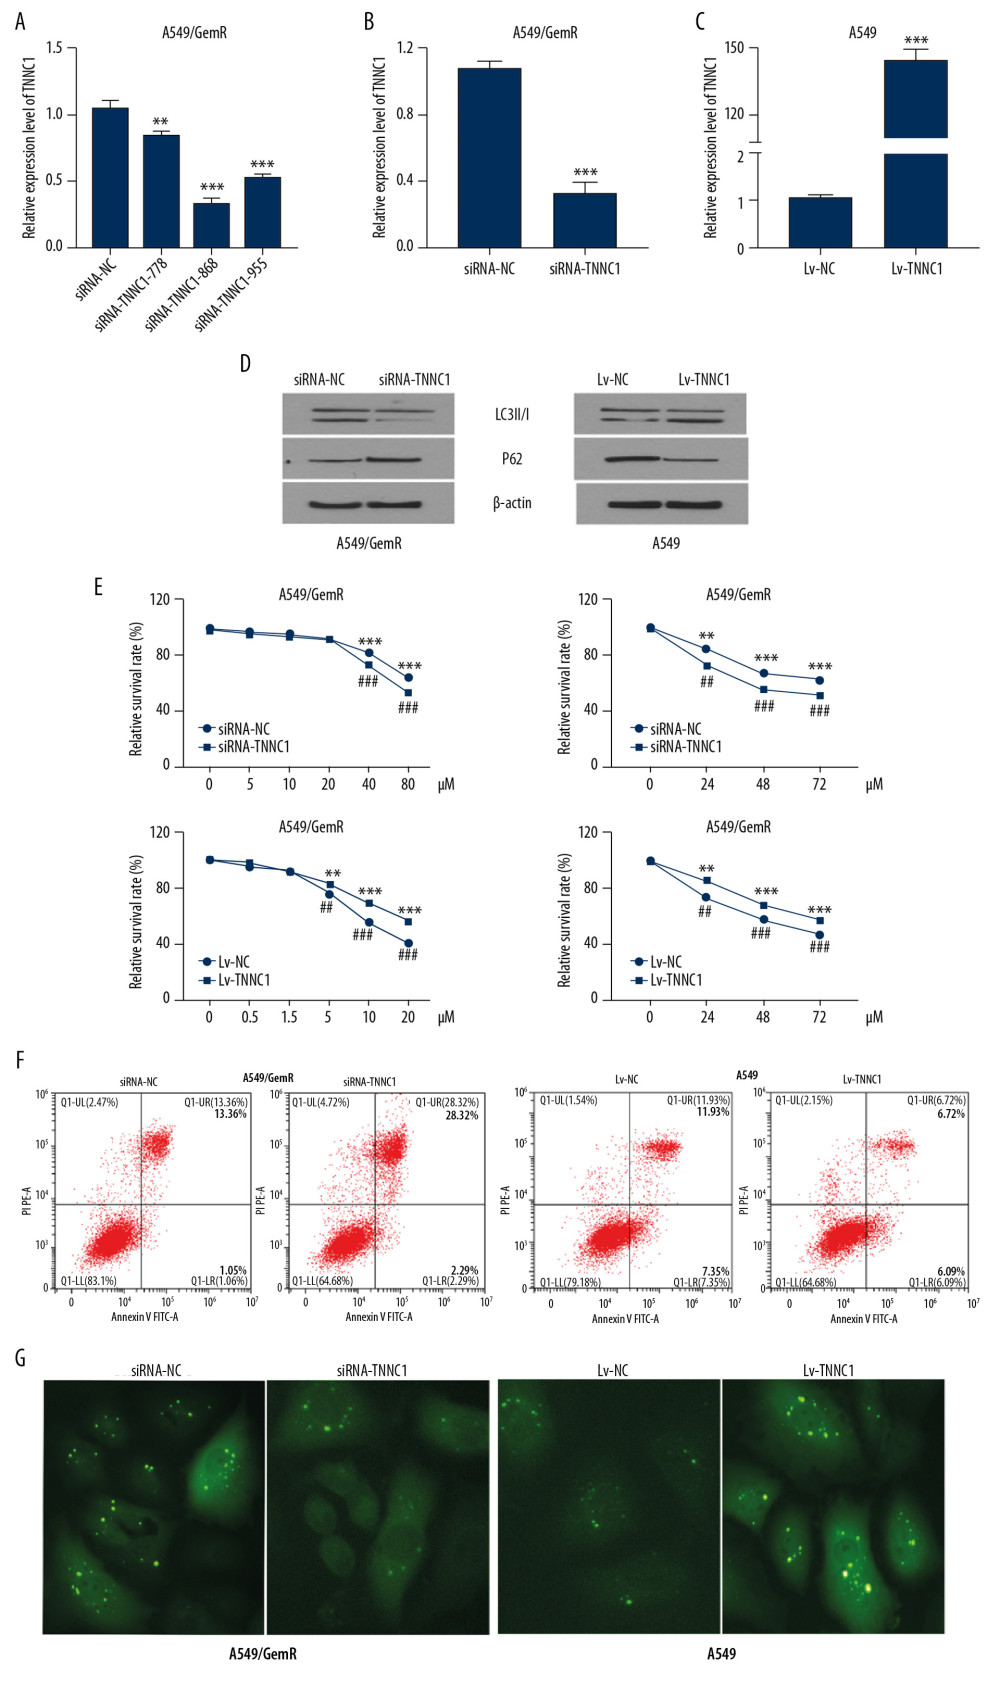 Troponin C1, slow skeletal and cardiac type (TNNC1) overexpression could enhance the sensitivity of A549 cells to gemcitabine (GEM). (A) Detection of the knockout effect of TNNC1. (B) TNNC1 lost model was successfully established in A549/GemR cells by transfecting TNNC1 short interfering ribonucleic acid (siRNA-TNNC1) and negative control RNA (siRNA-NC) respectively by reverse tracscription-quantitative polymerase chain reaction (RT-qPCR) (*** P<0.01). (C) Stable TNNC1-overexpressed cell line was successfully established in A549 cells by infecting with TNNC1 overexpression lentivirus (Lv-TNNC1) or negative control lentivirus (Lv-NC) respectively through RT-qPCR assay (*** P<0.01). (D) Western blot assay was used to evaluate the expression of autophagy-related proteins in A549 and A549/GemR model cells. (E) A549 cells were incubated with increasing concentrations of GEM (0–20 μM) for 24 h; meanwhile A549/GemR cells were incubated with increasing concentrations of GEM (0–80 μM) for 24 h. Cell viability was assessed by 3-(4,5-dimethylthiazol-2-yl)-2,5-diphenyltetrazolium bromide (MTT). A549 were incubated with 5 μM GEM, whereas A549/GemR were incubated with 40 μM GEM. Then cell viability was determined at 24, 48, and 72 h by MTT assay. The results were shown as mean±SD of four independent experiments. (** P<0.01, *** P<0.001, ## P<0.01, ### P<0.001). (F) Flow cytometry with annexin V-fluorescein isothiocyanate/propidium iodide double staining detected apoptosis in A549 and A549/GemR model cells after GEM treatment respectively with 5 μM and 40 μM for 24 h. (G) LC3 puncta accumulation in A549 and A549/GemR model cells after GEM treatment with 5 μM and 40 μM for 24 h, respectively. The original magnification was ×200.